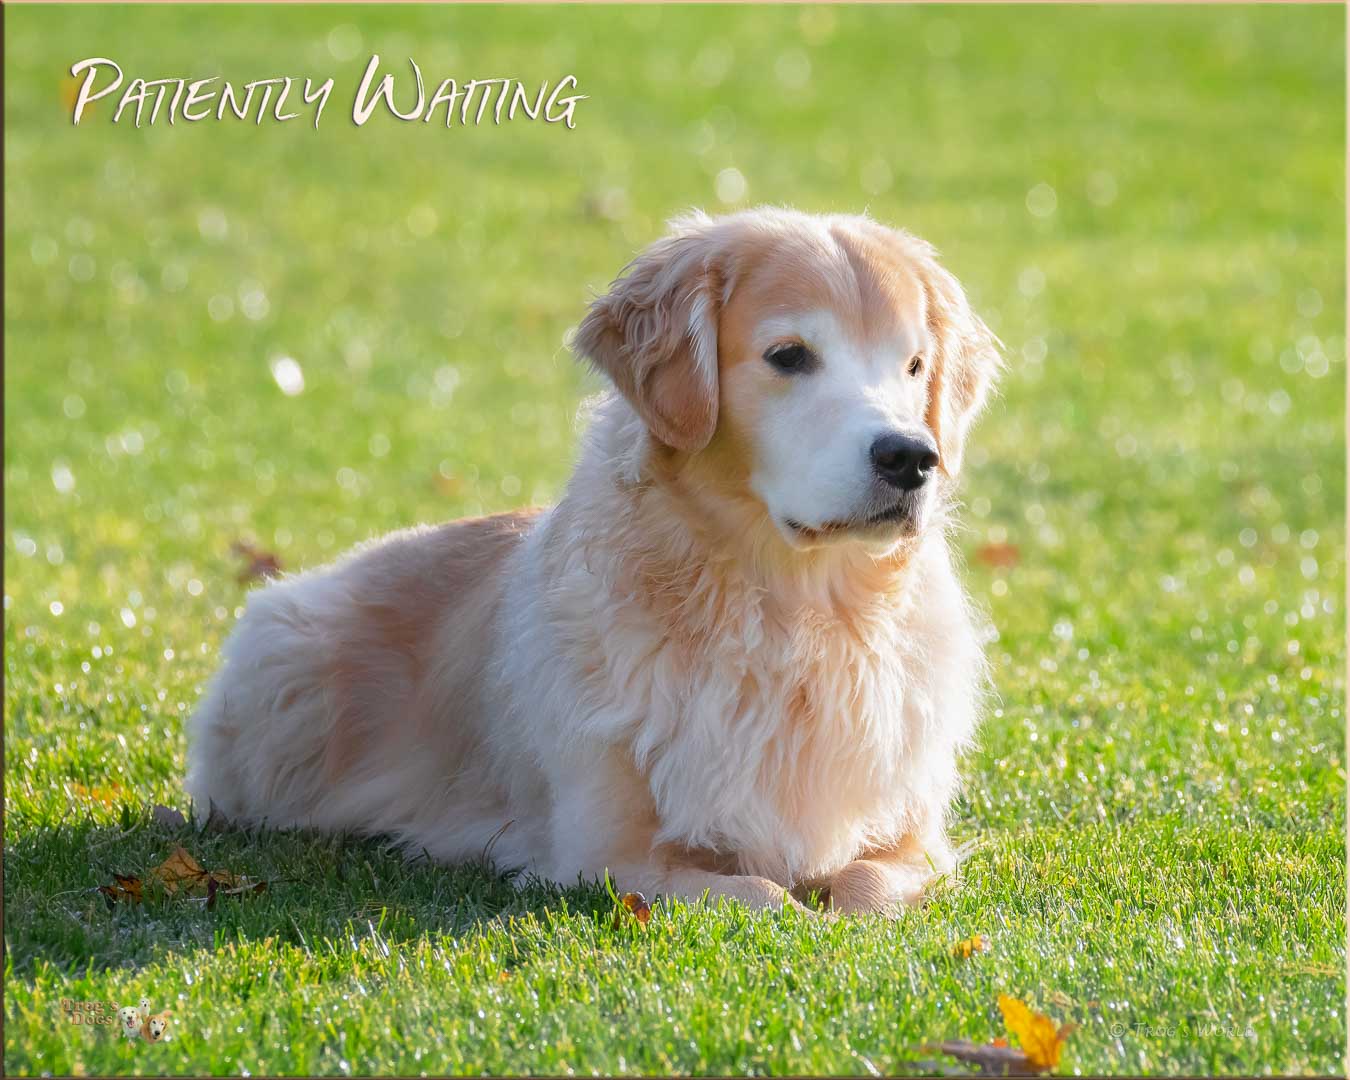 Golden Retriever laying in the morning grass